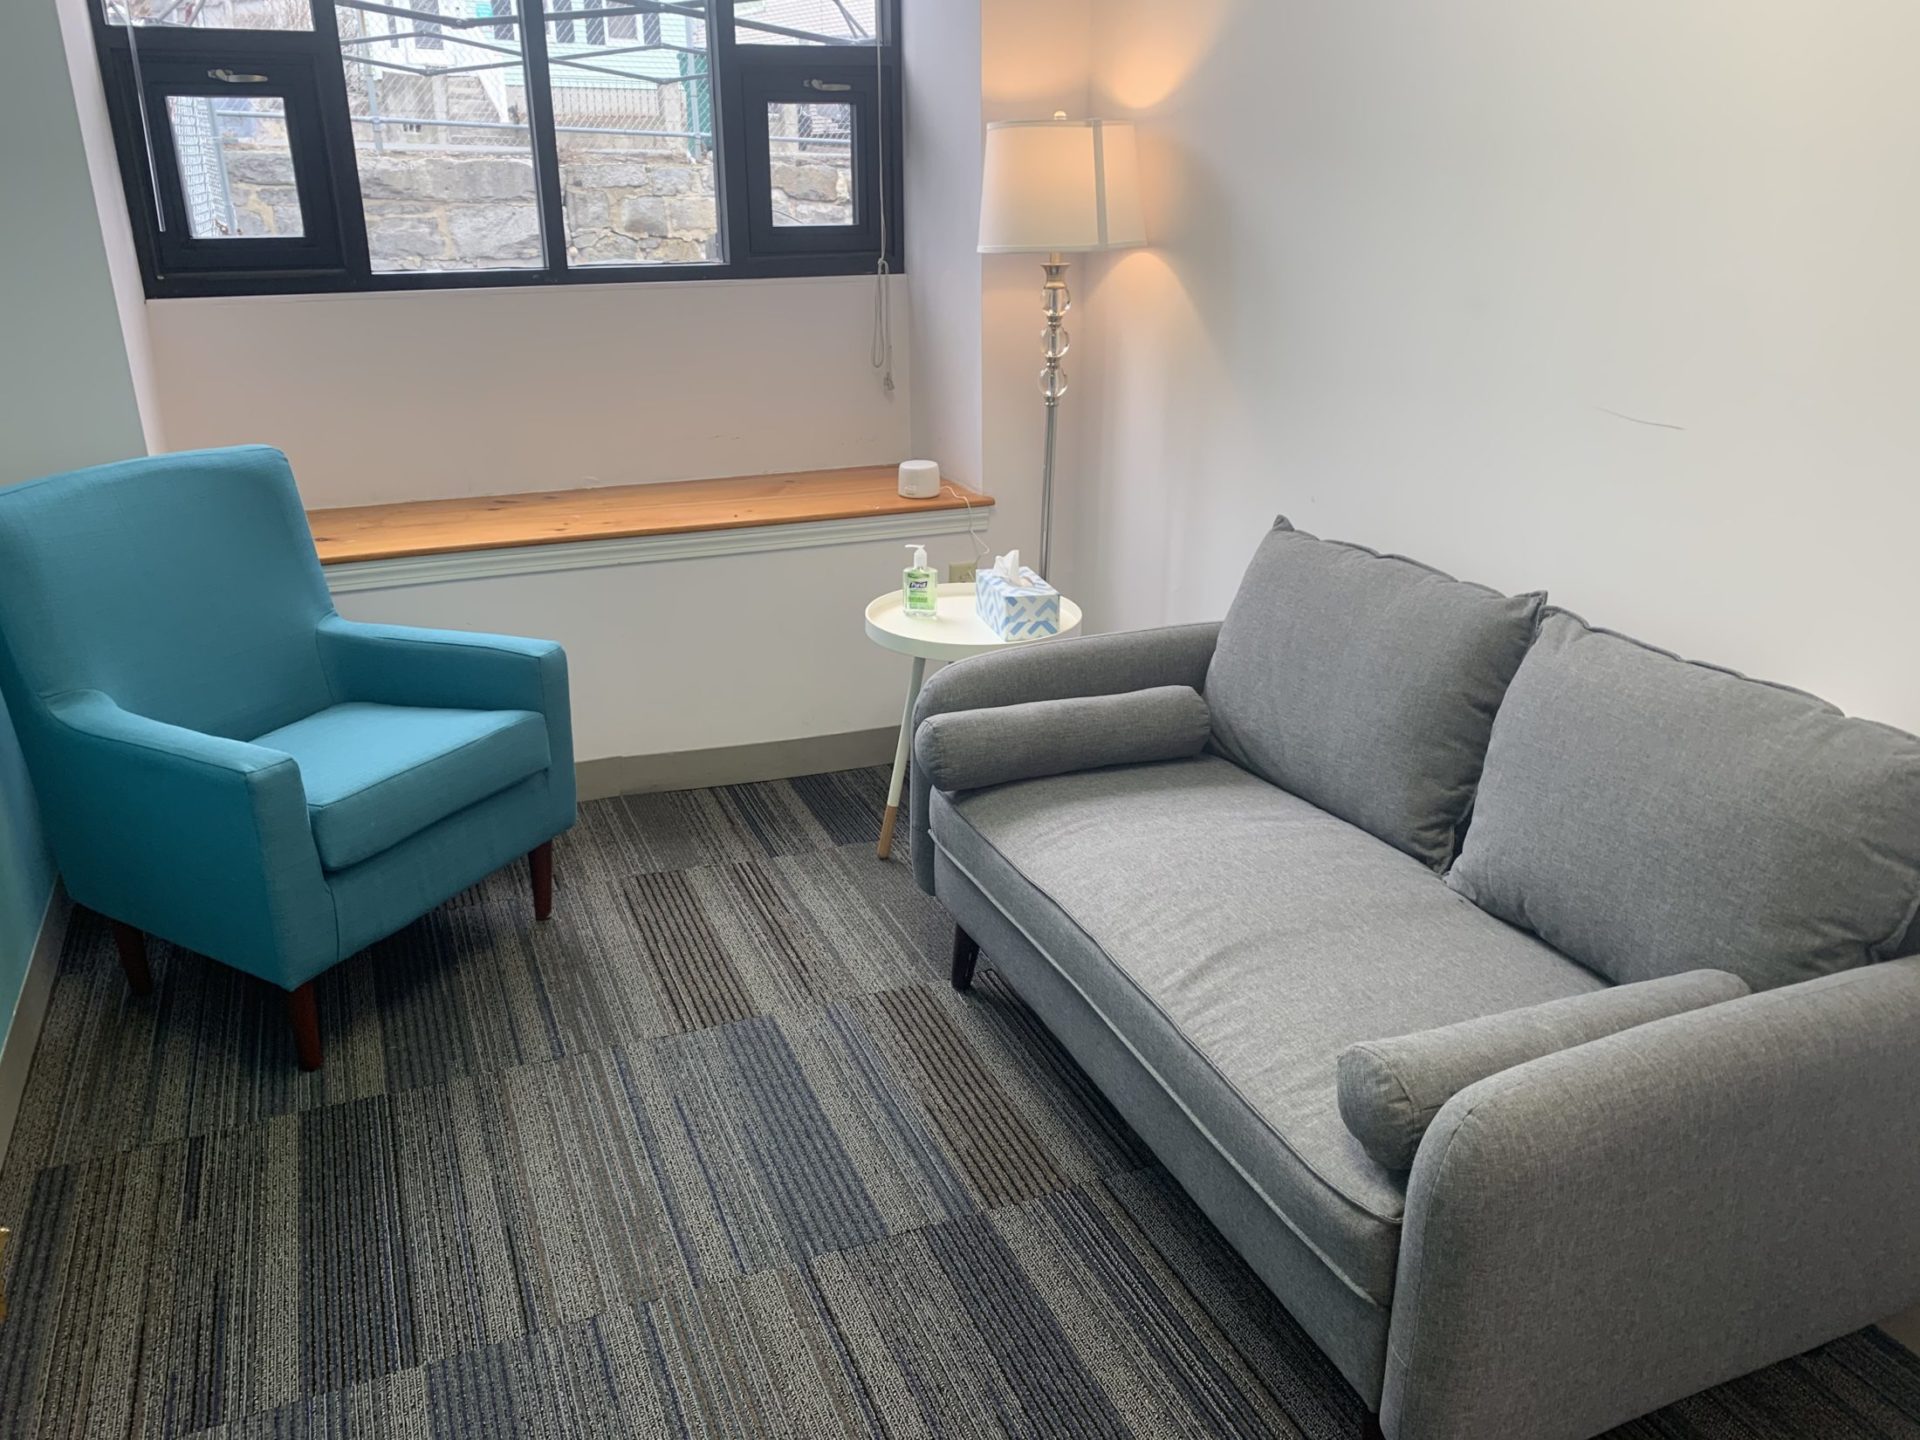 Eleanor Health meeting room for one-on-one therapy or couples counseling sessions